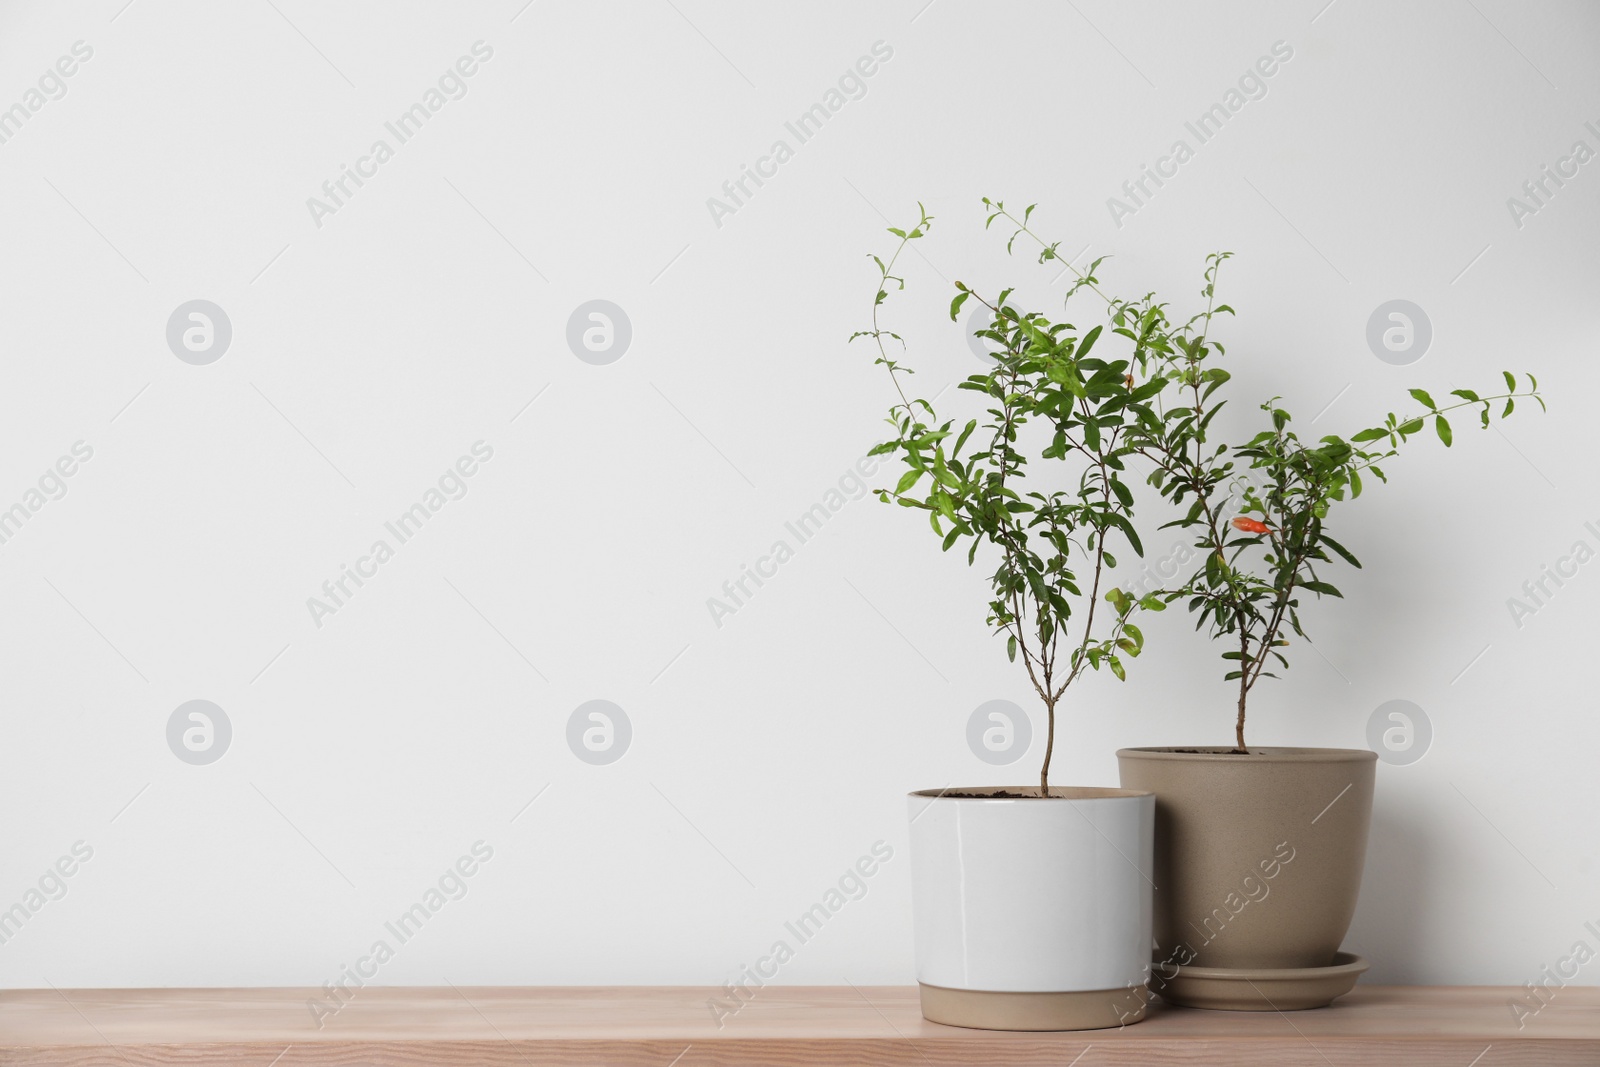 Photo of Pomegranate plants with green leaves in pots on wooden table near white wall, space for text